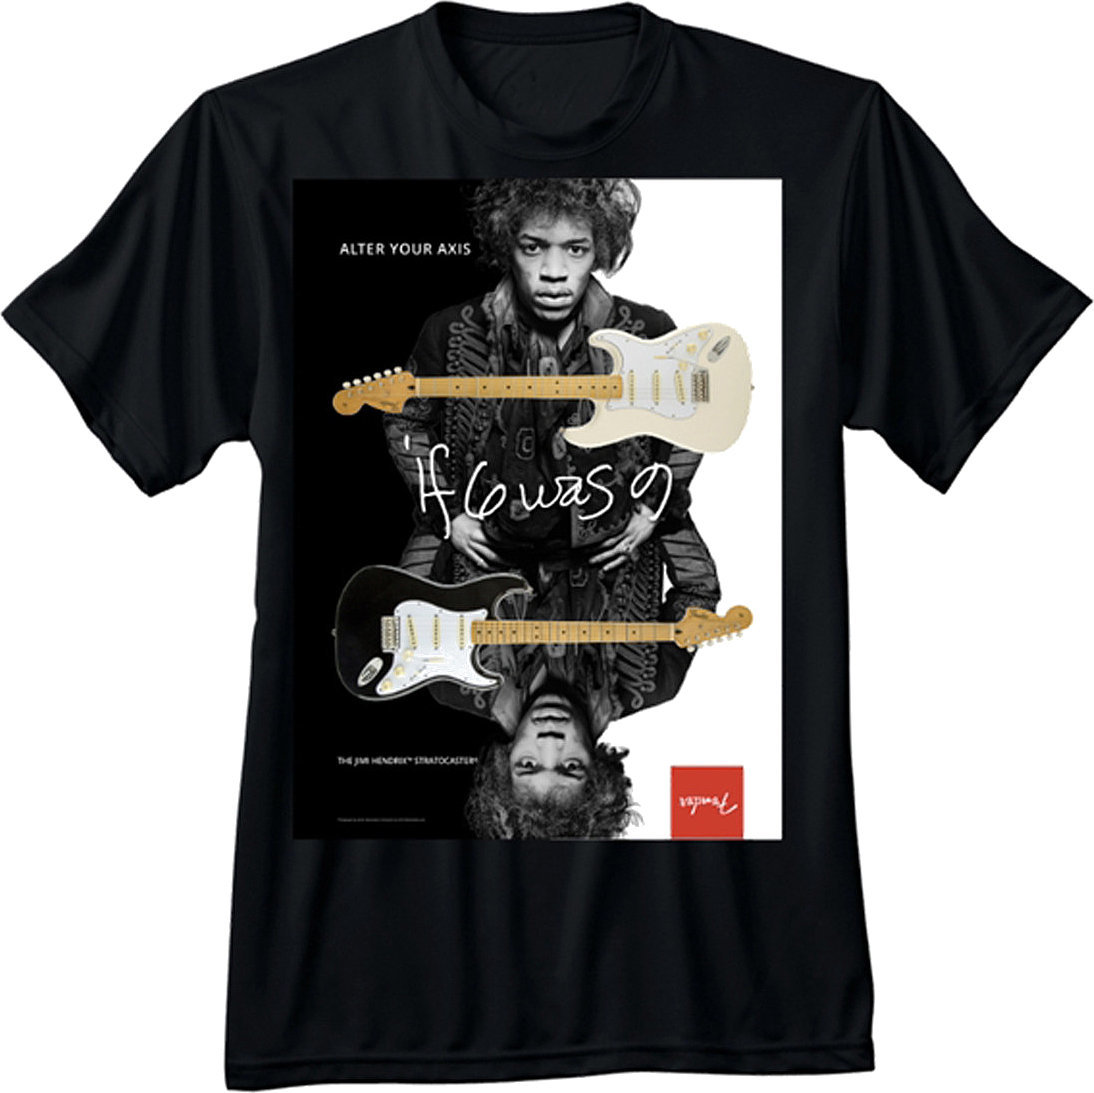 Maglietta Fender Jimi Hendrix Collection Alter Your Axis T-Shirt Black M